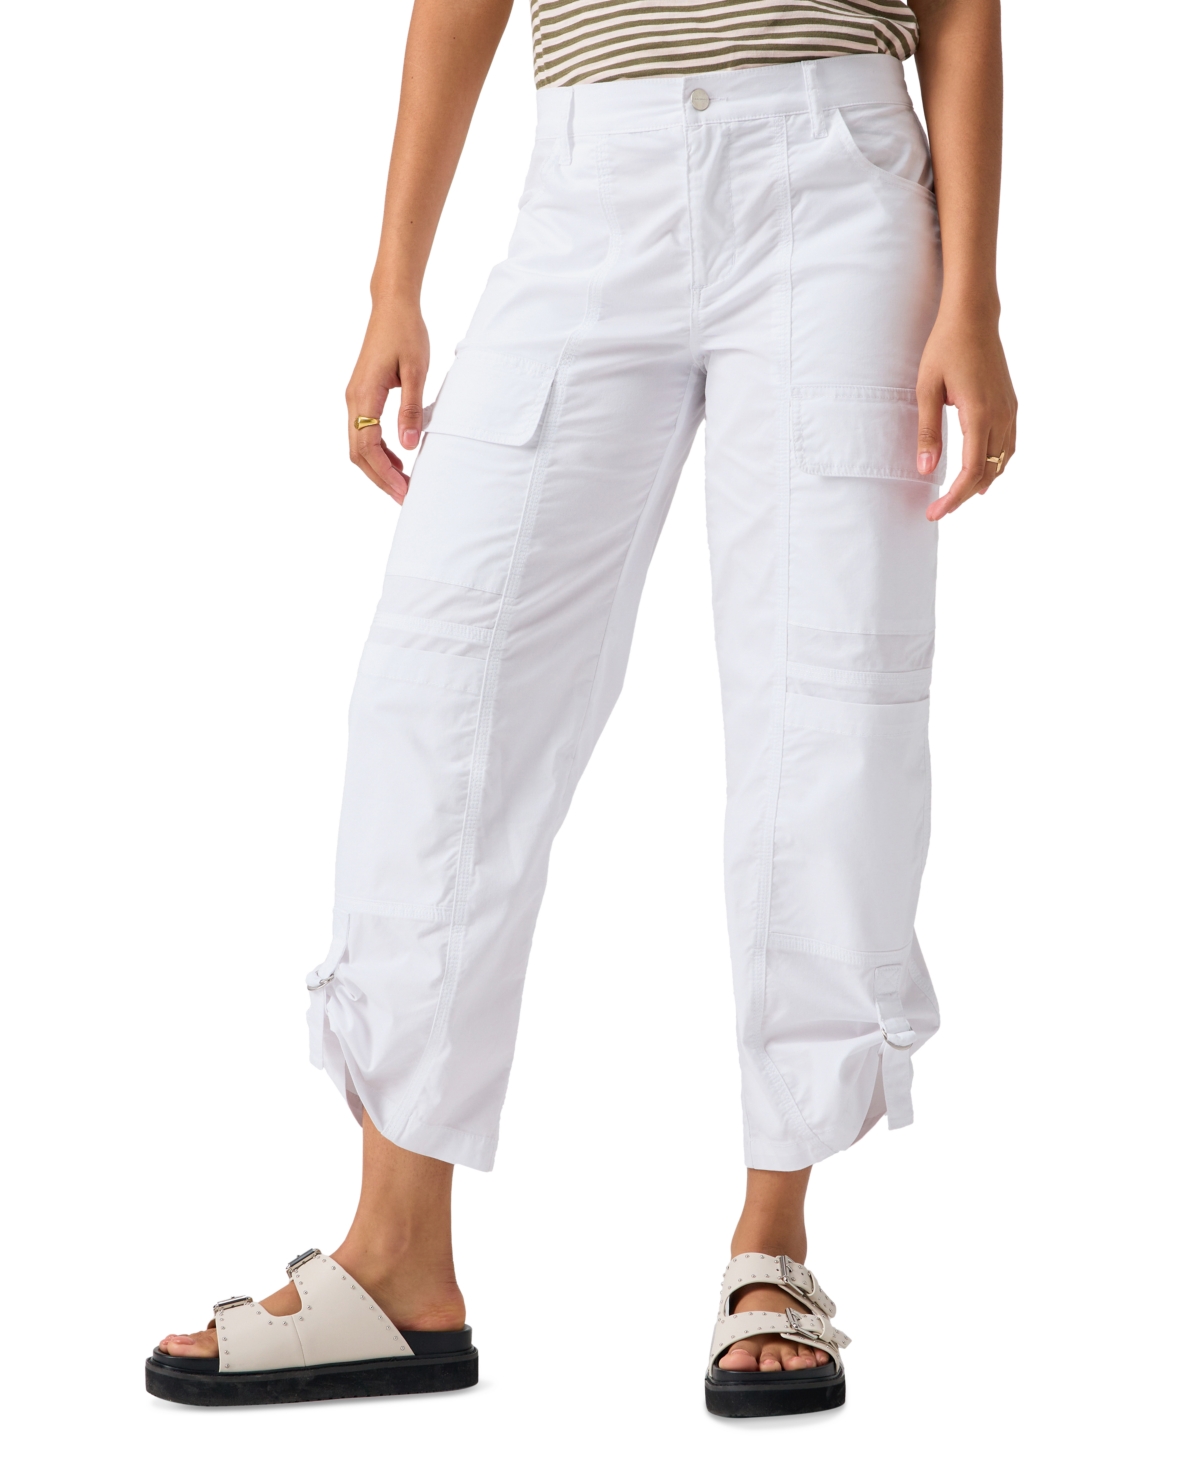 Women's Cali Solid Roll-Tab-Cuffs Cargo Pants - White